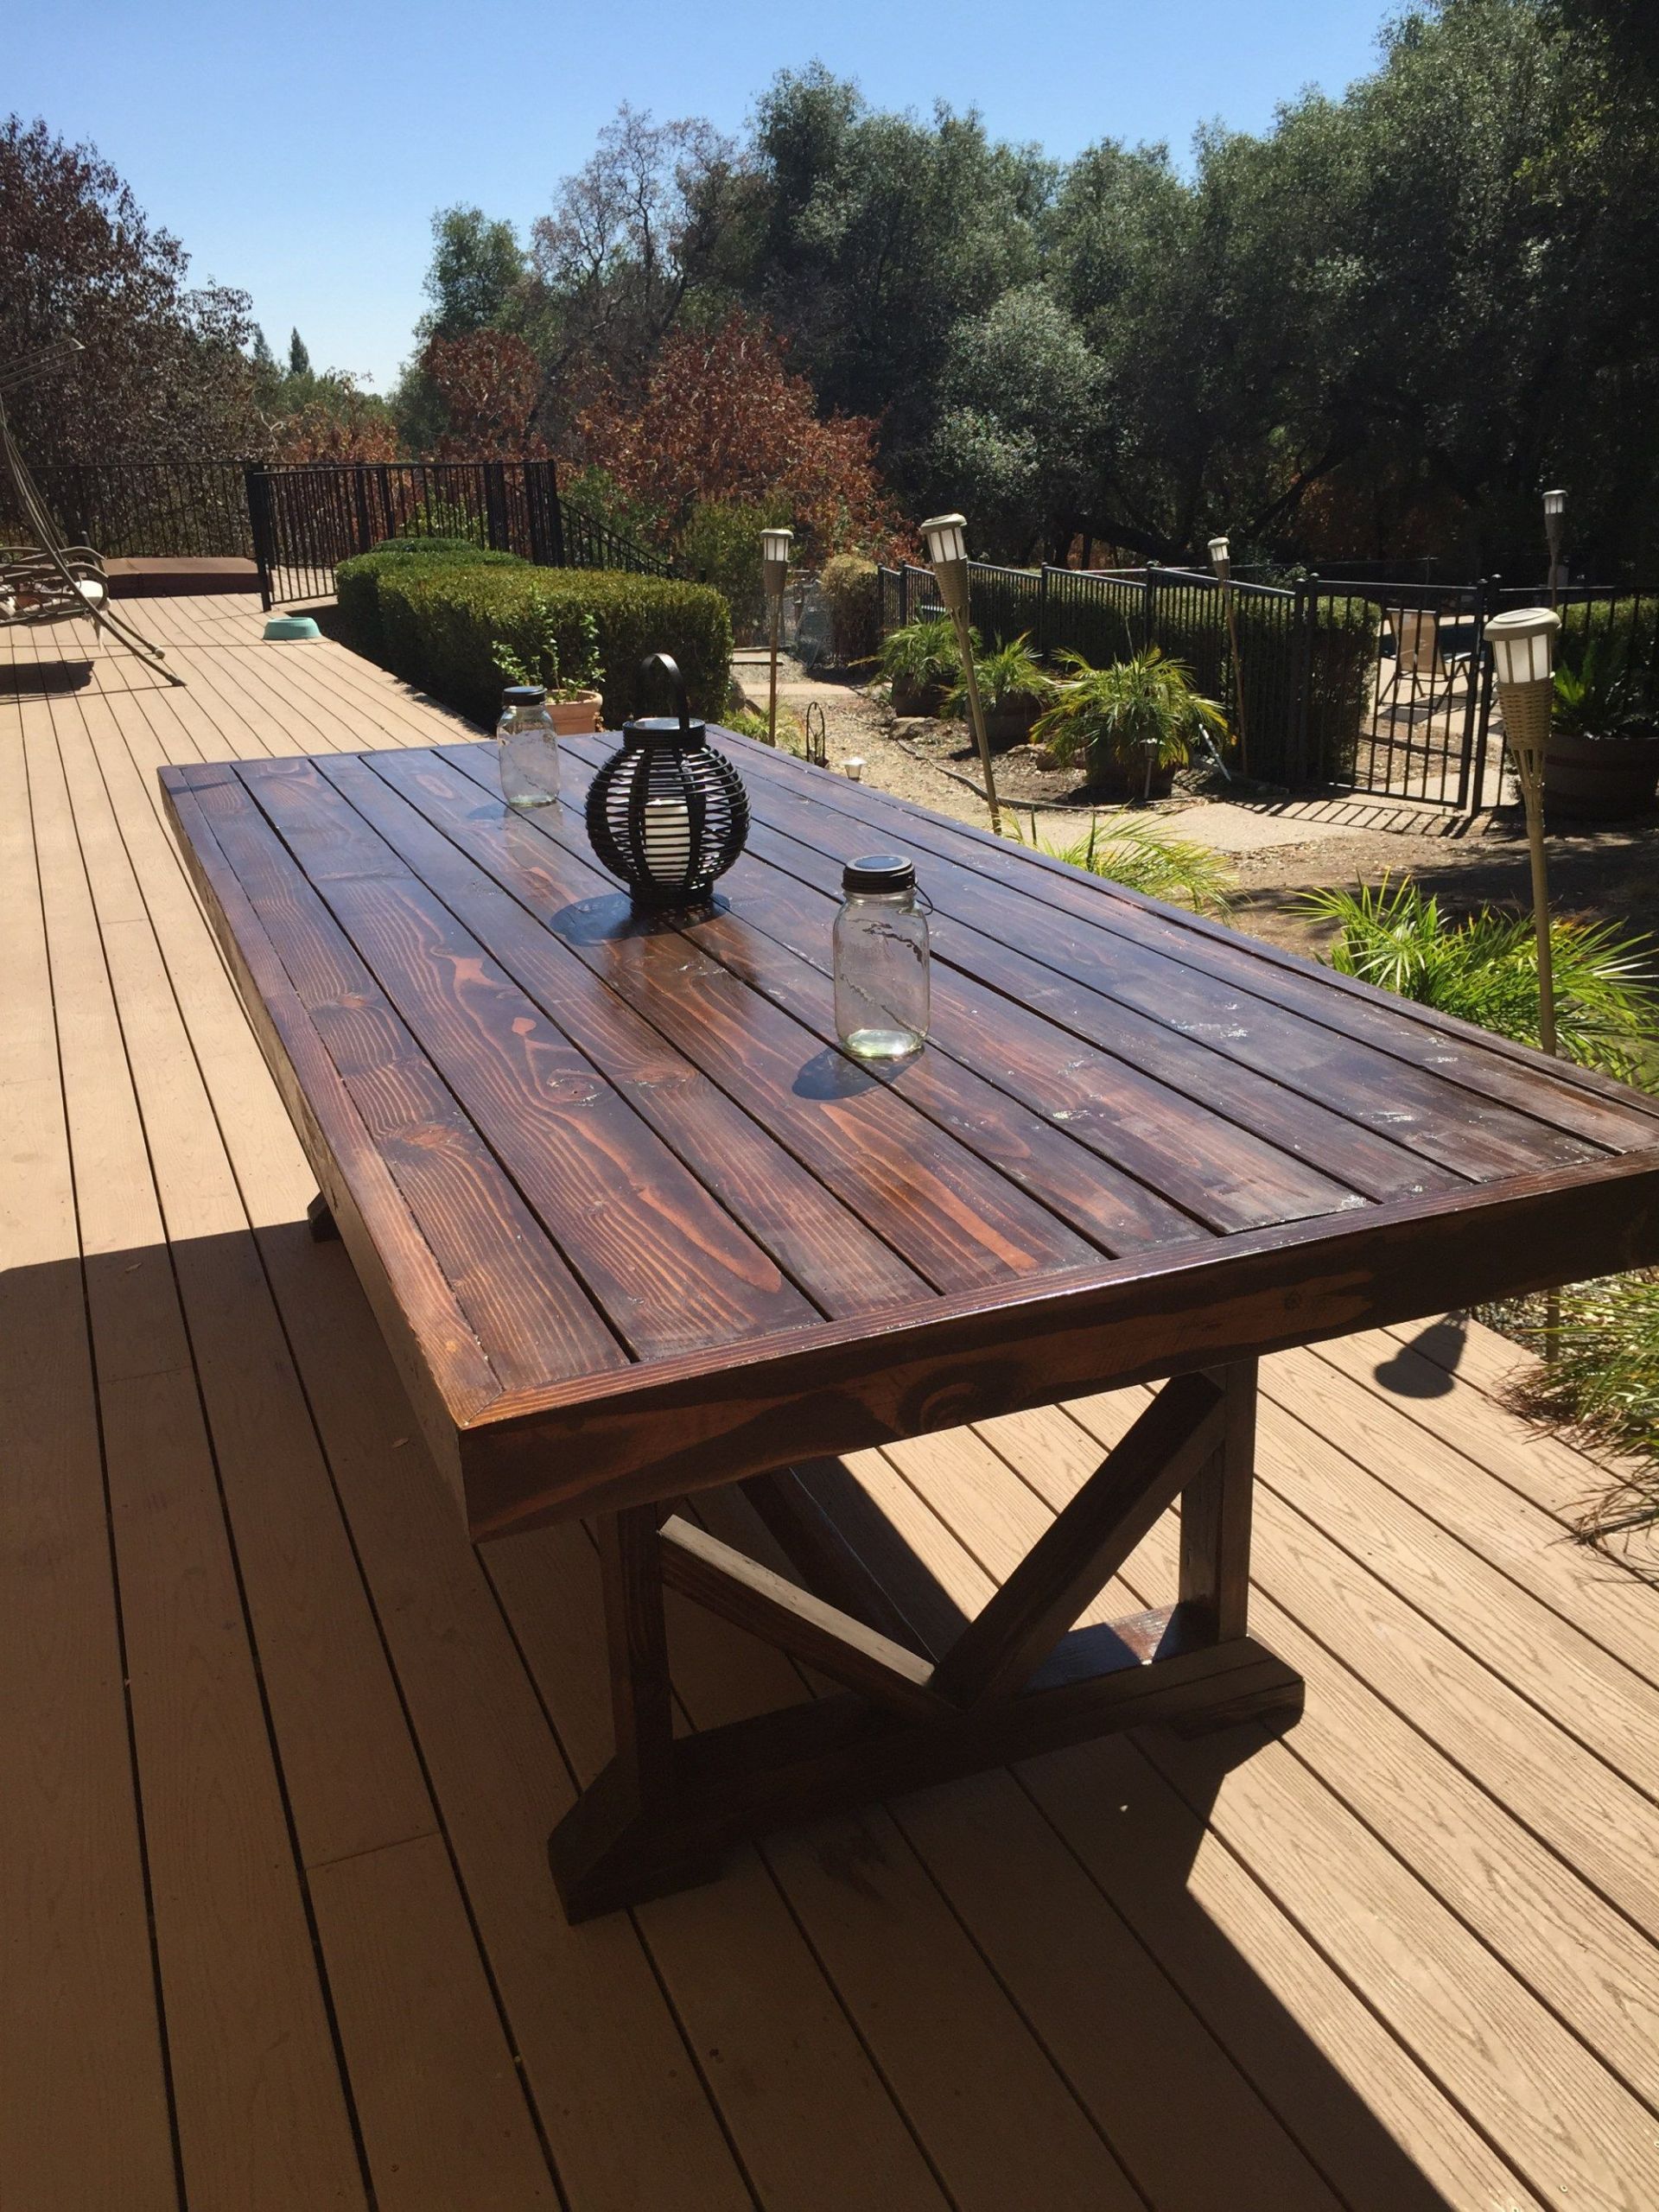 DIY Outdoor Dining Table Plans
 DIY Outdoor Dining Table